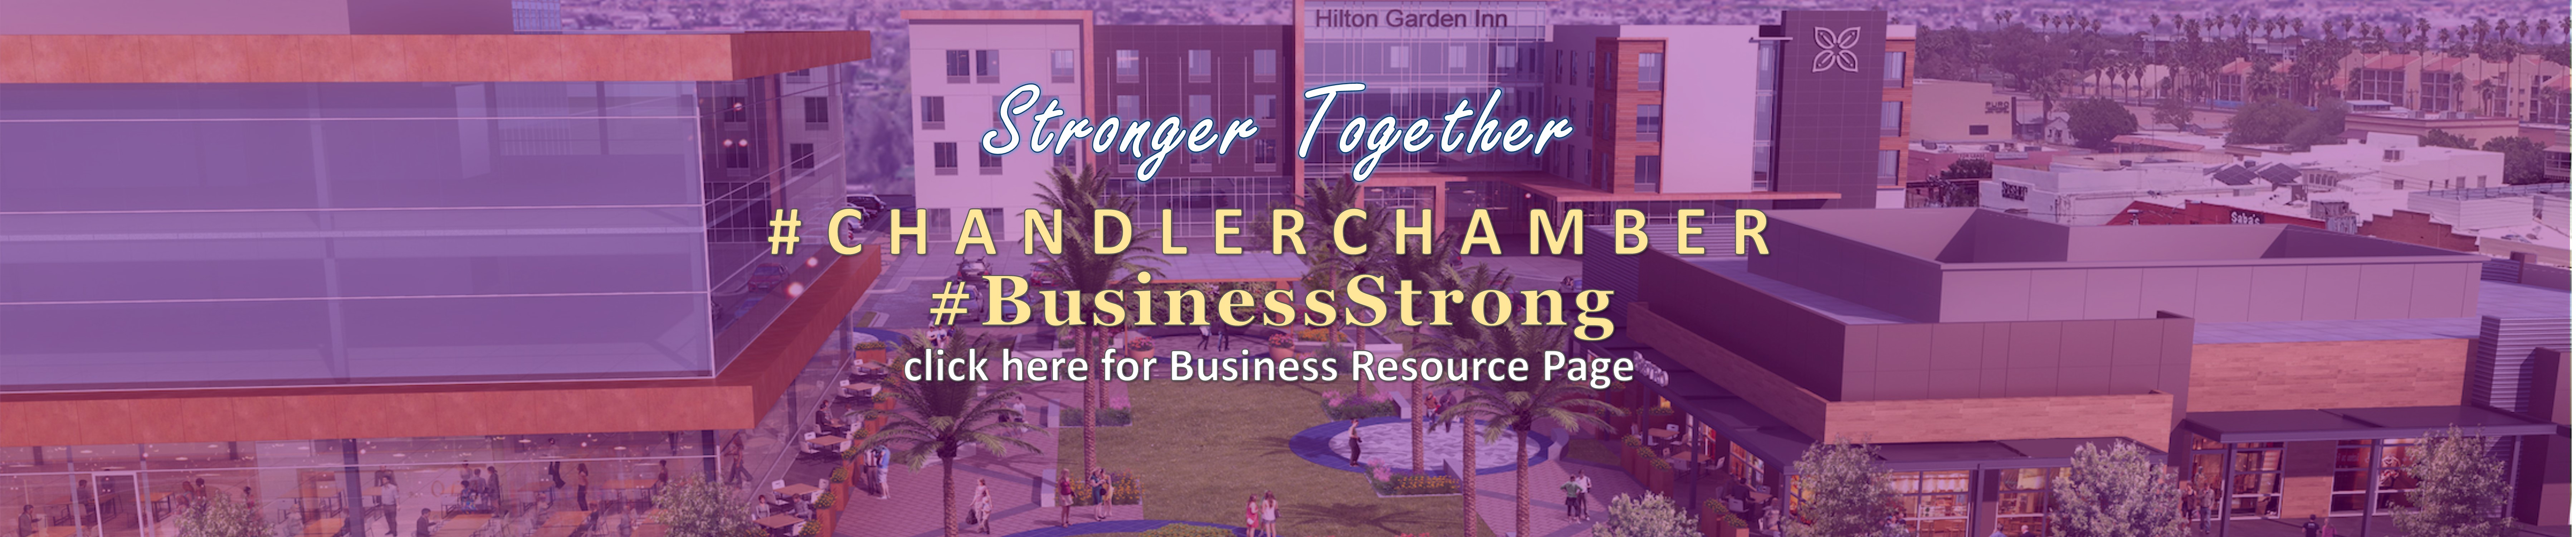 Home - Chandler Chamber of Commerce